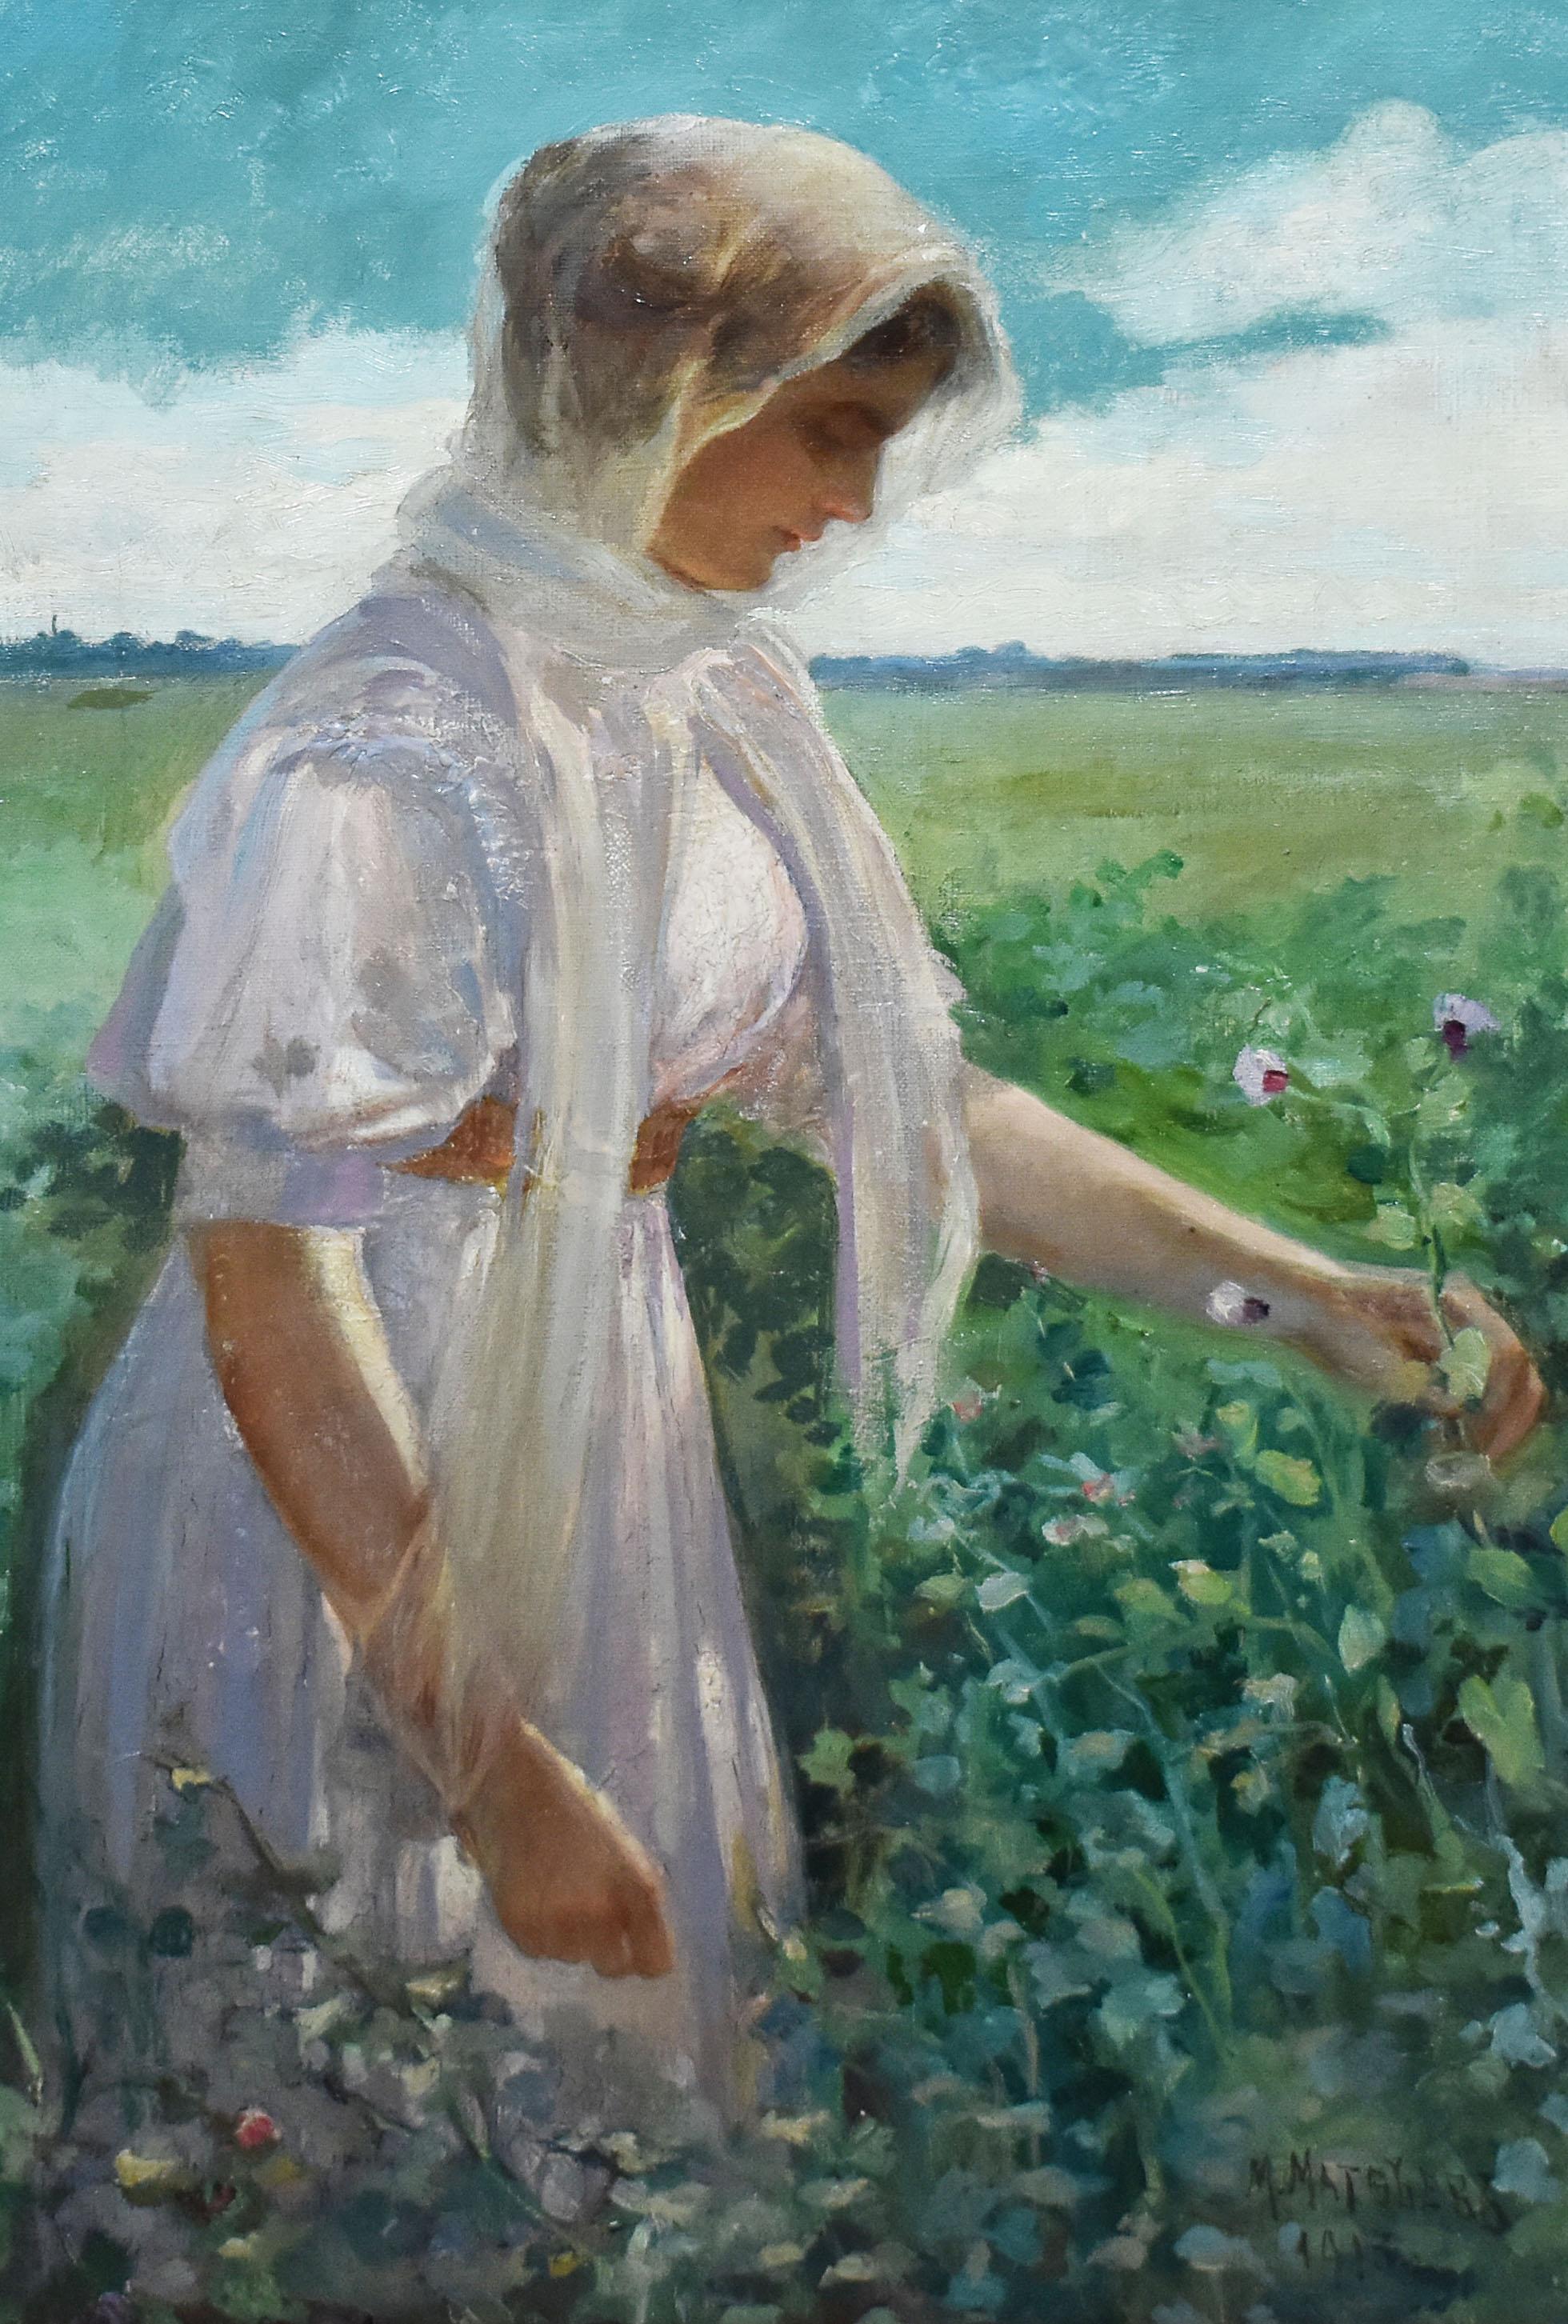 Antique American School 1913 Portrait of Woman Picking Flowers  Oil Painting - Black Figurative Painting by Unknown